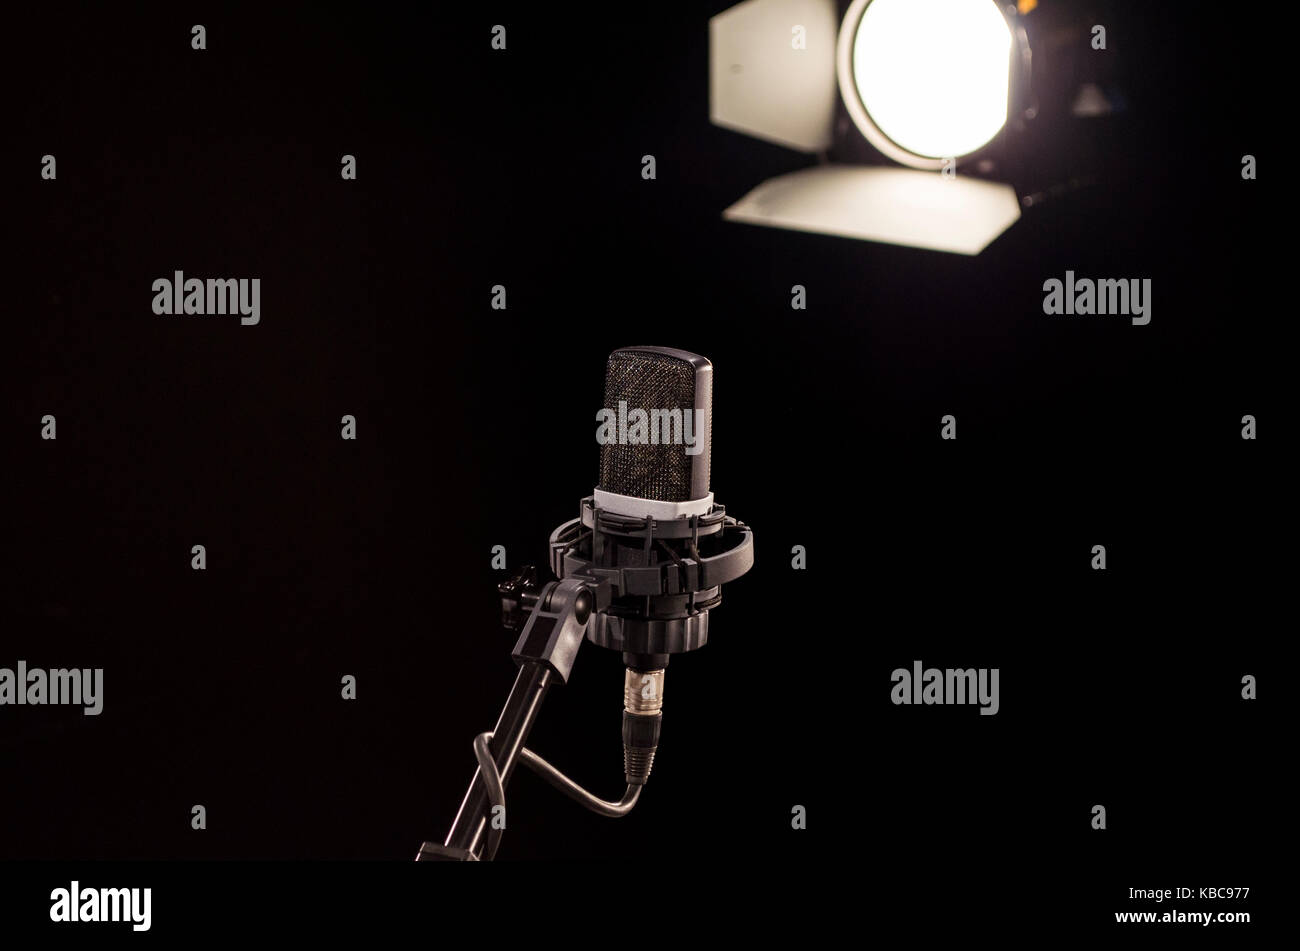 Retro microphone on stage a background of studio light Stock Photo